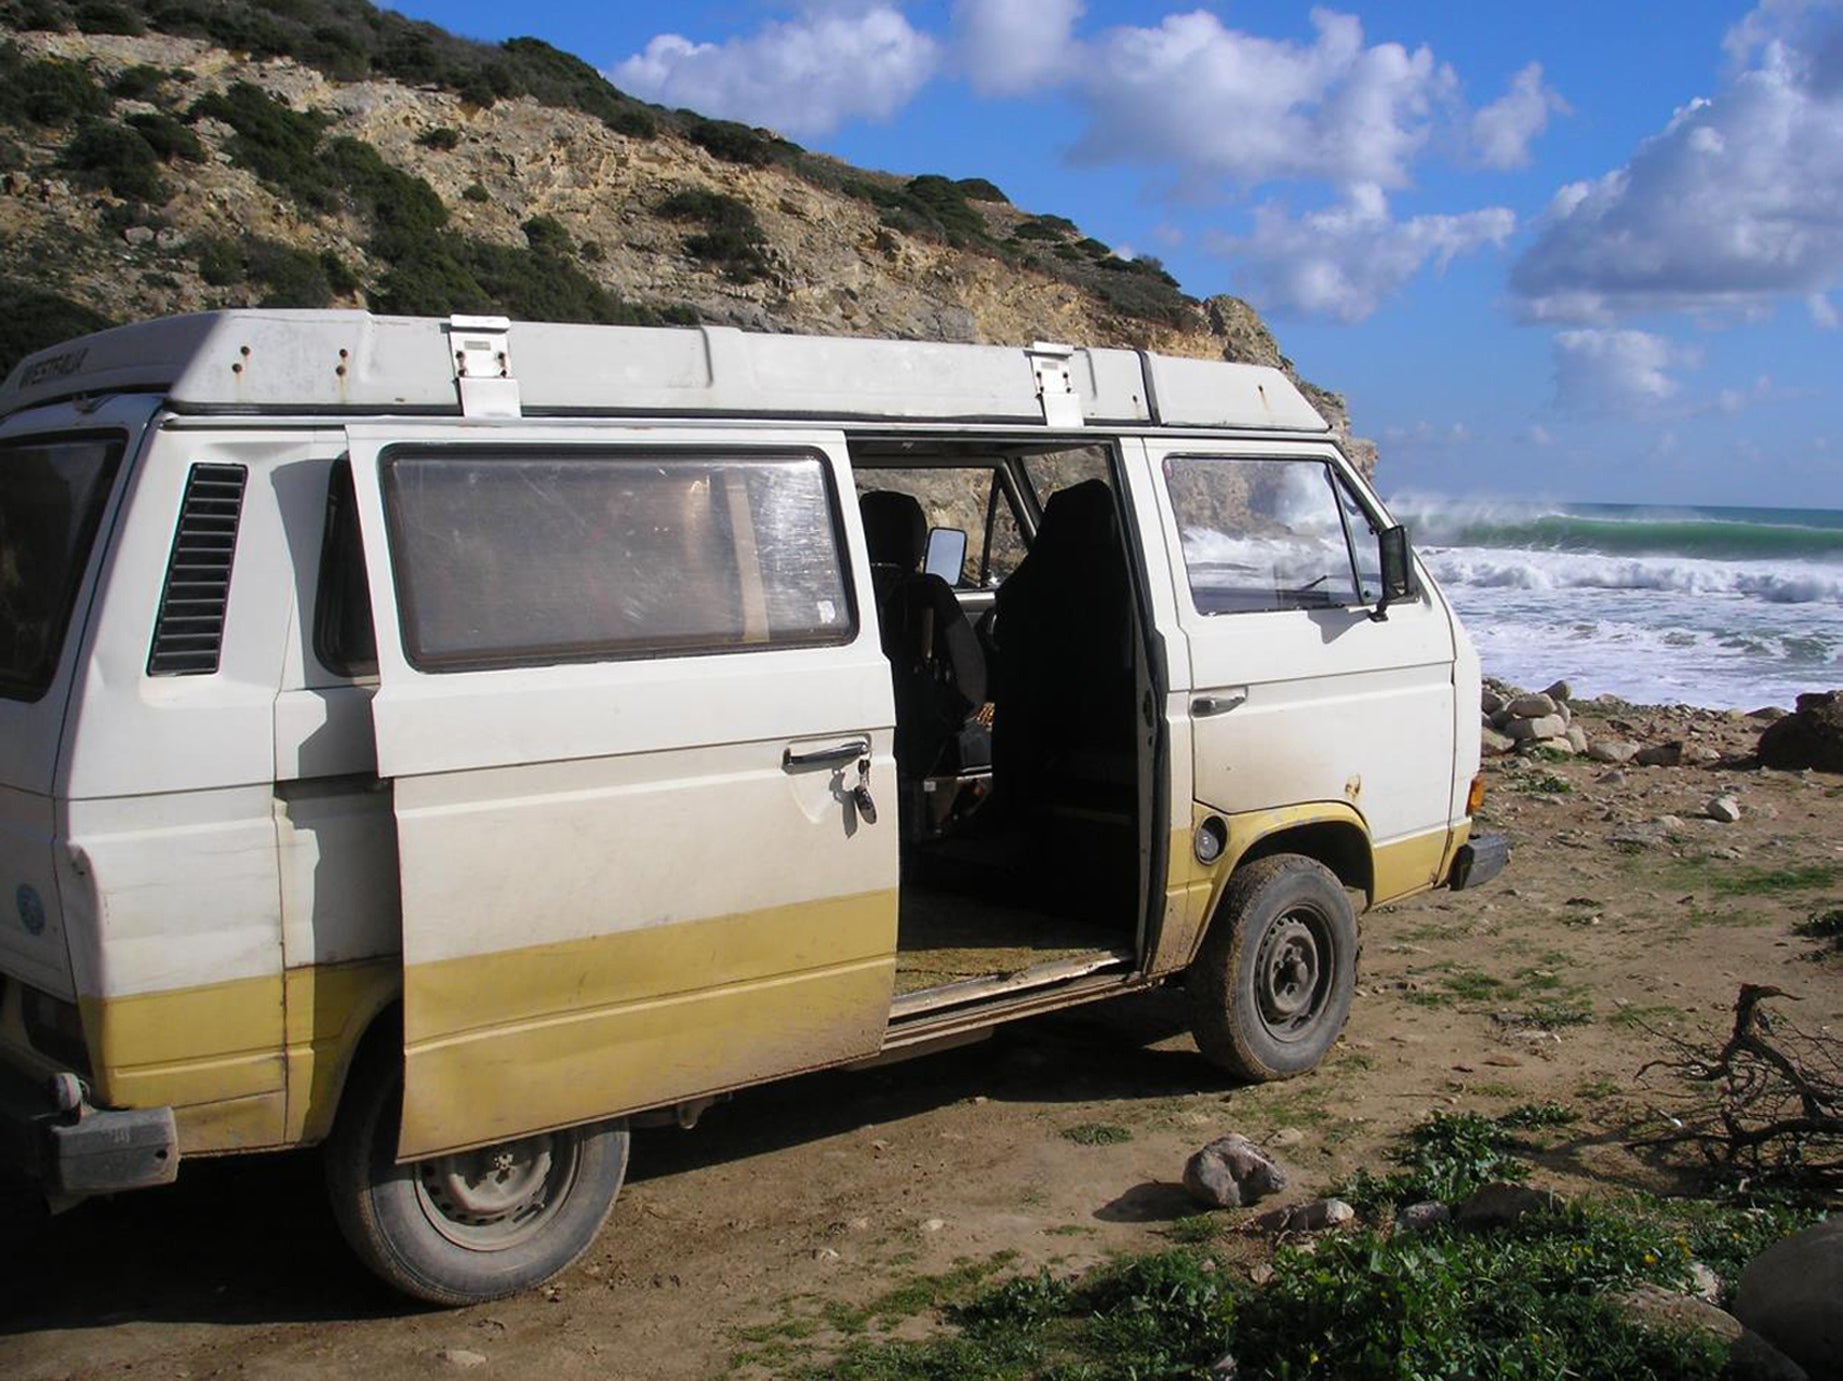 Brueckner had reportedly been using a yellow and white VW T3 Westfalia campervan in and around Praia da Luz